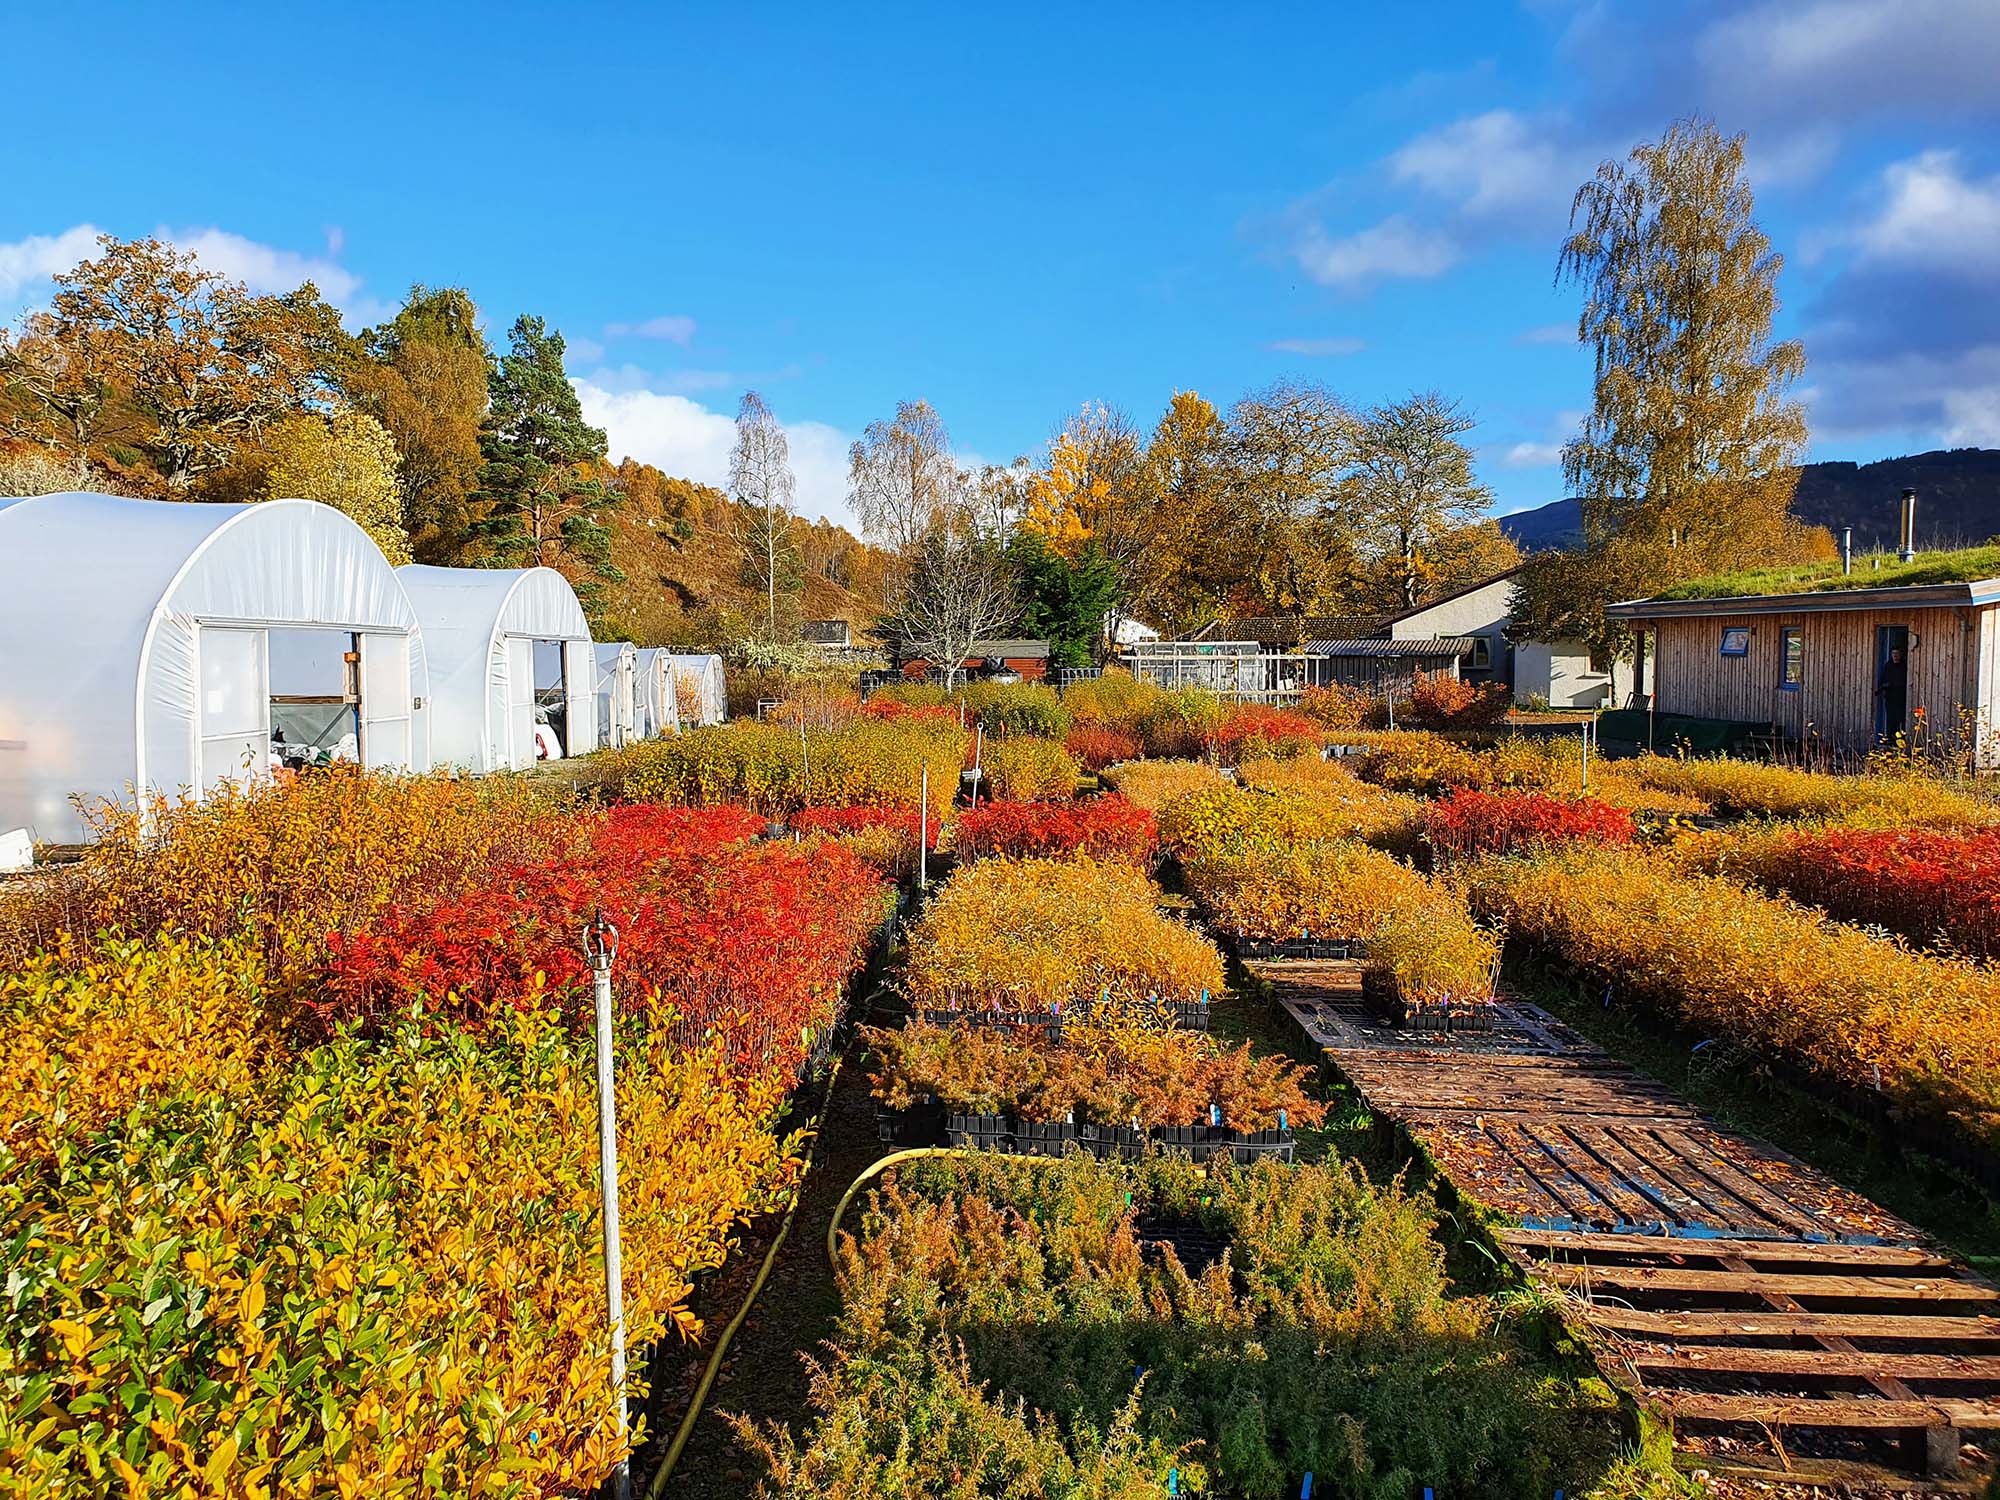 On a sunny day with blue skies, groups of autumn-coloured plants in a nursery setting